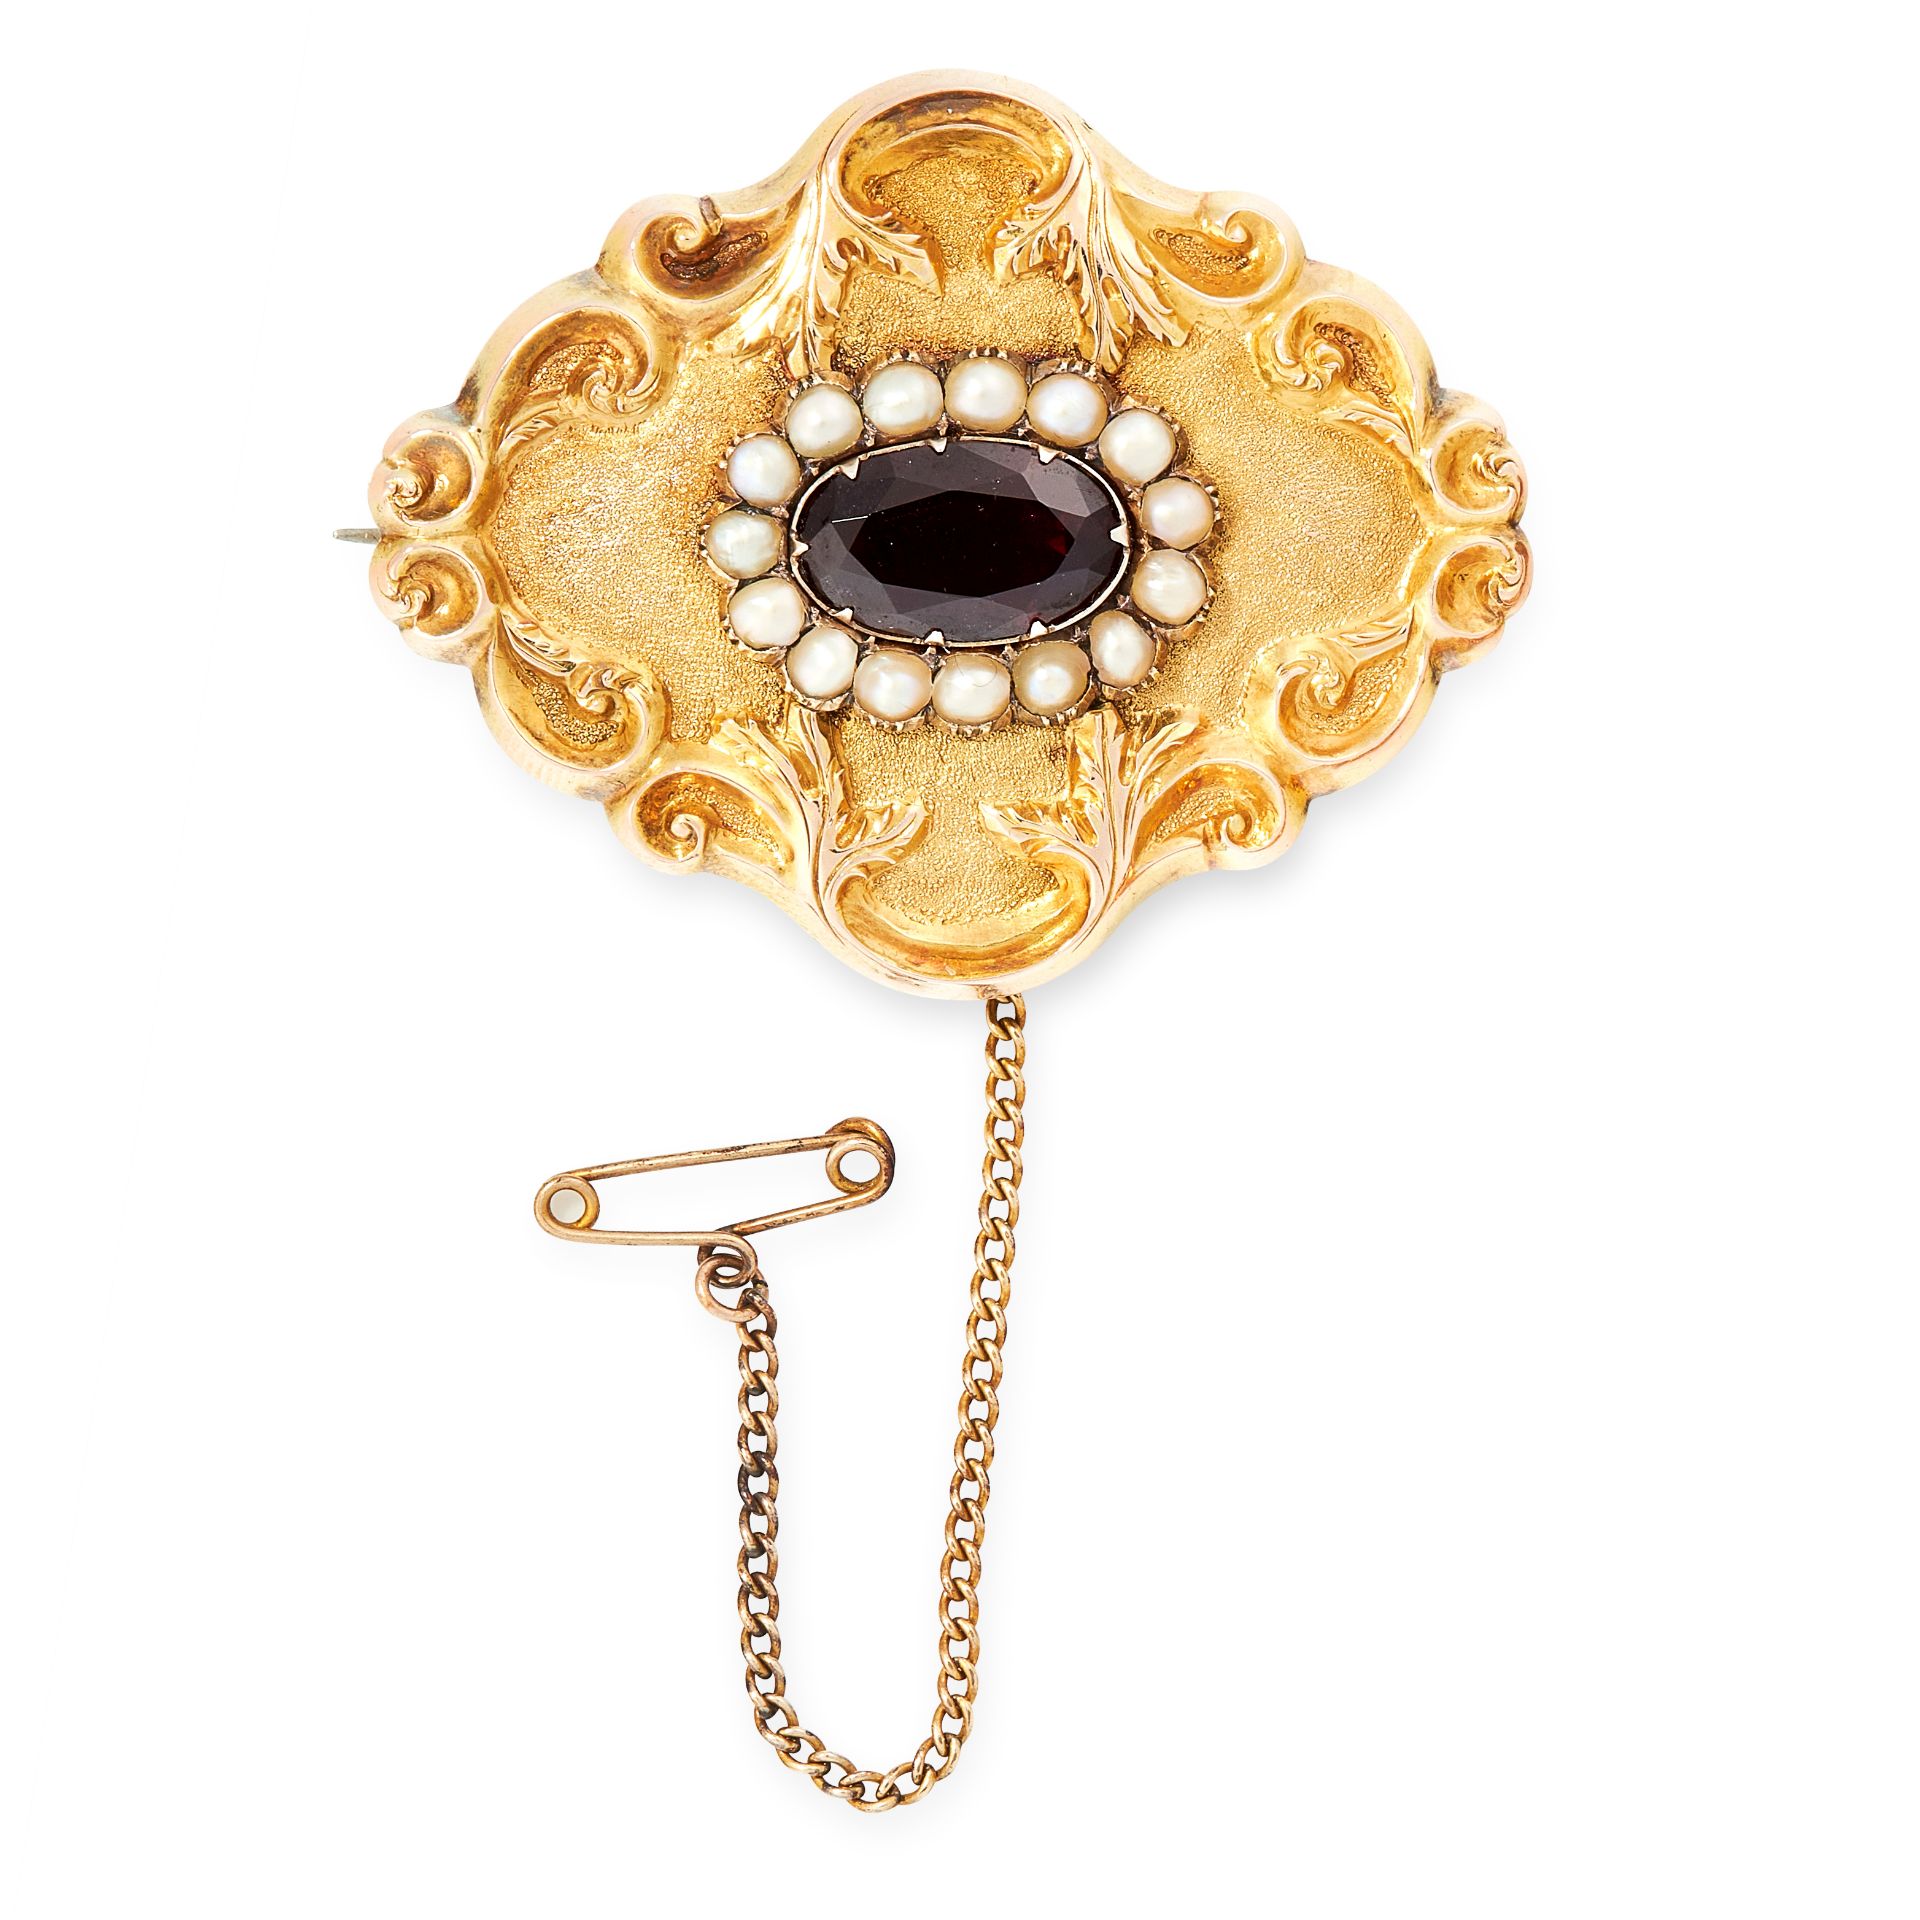 AN ANTIQUE GARNET AND PEARL BROOCH, 19TH CENTURY in yellow gold, set with an oval cut garnet